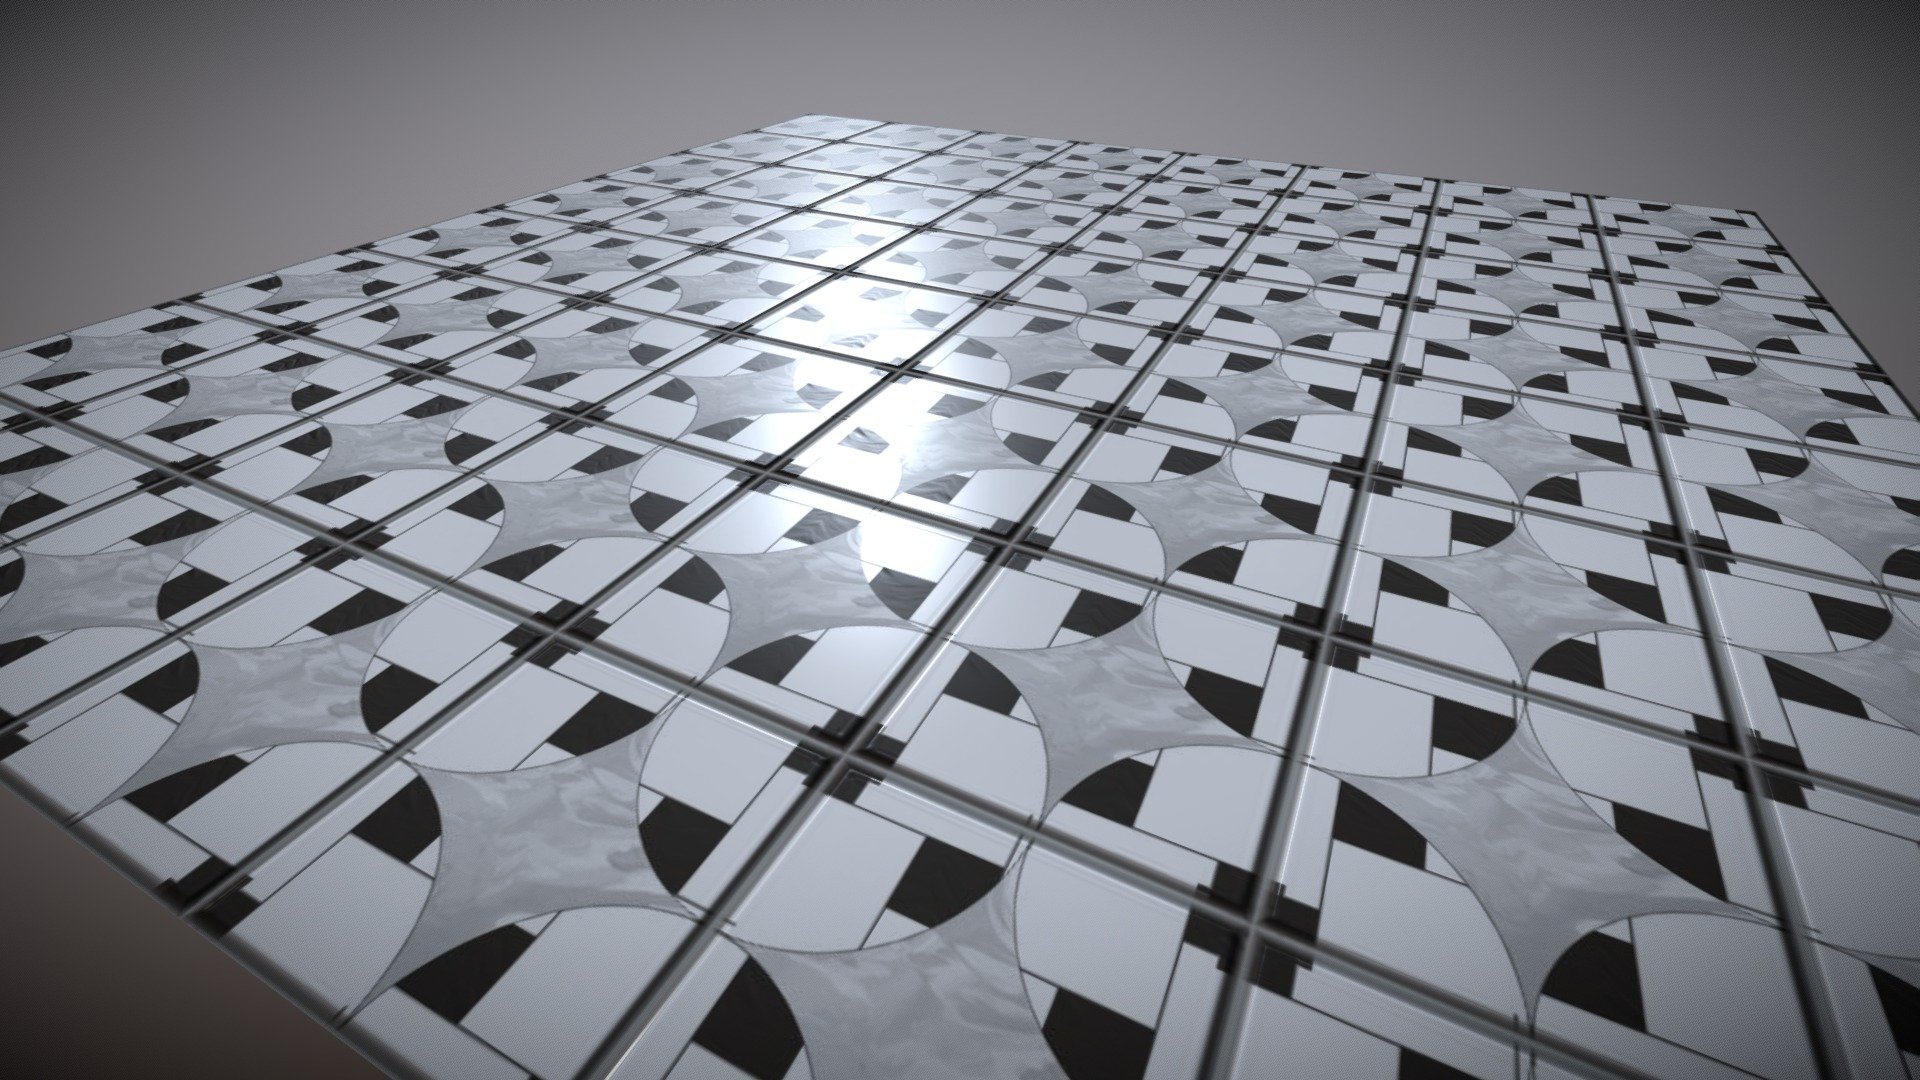 A quick floor tiling exercise in Substance Designer to practice the specular/glossiness workflow 3d model